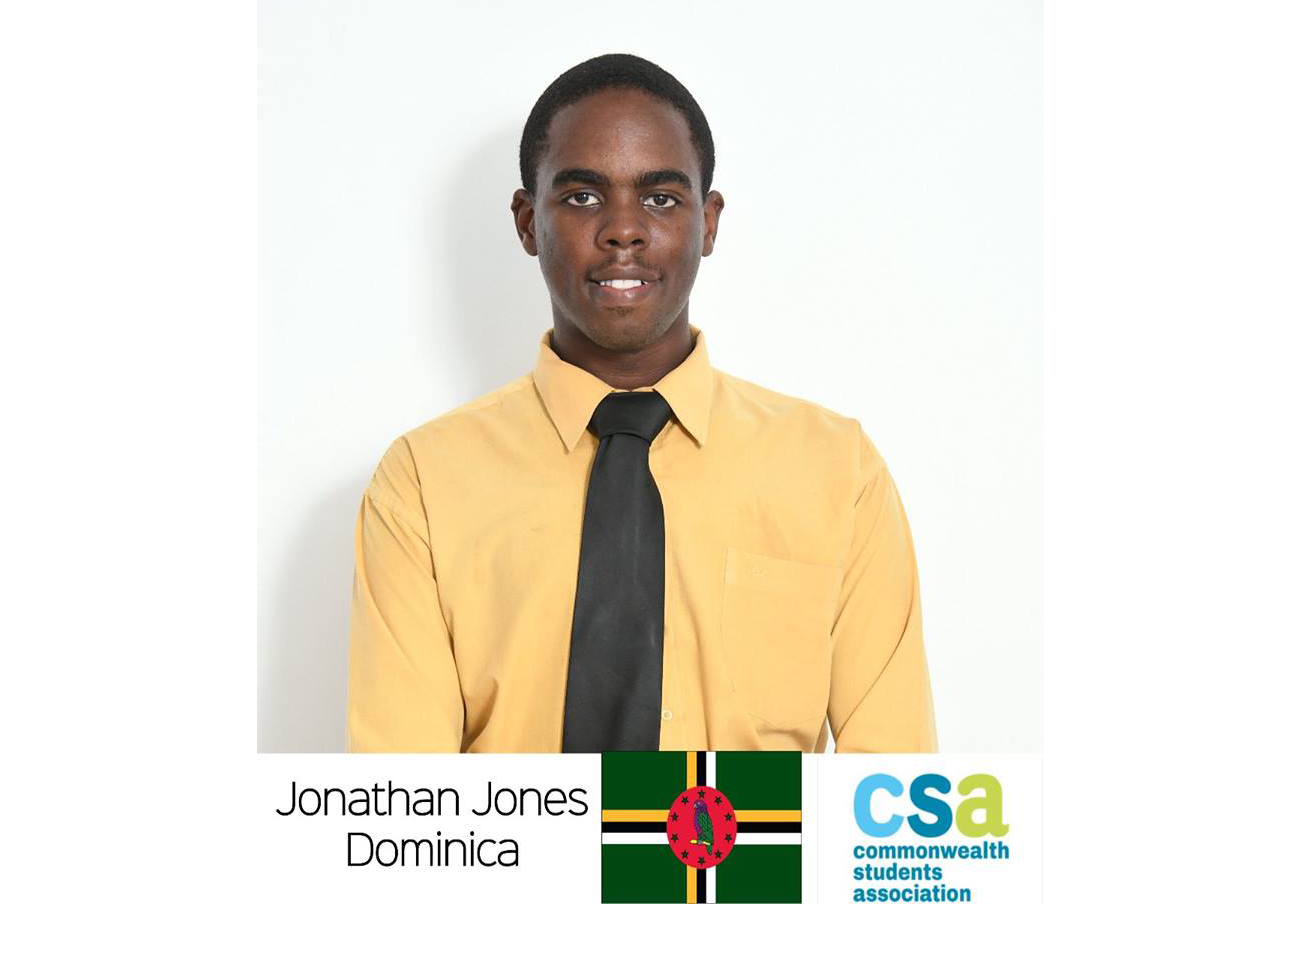 Commonwealth Students’ Association, Caribbean and Americas Regional Working Group 2018-2020